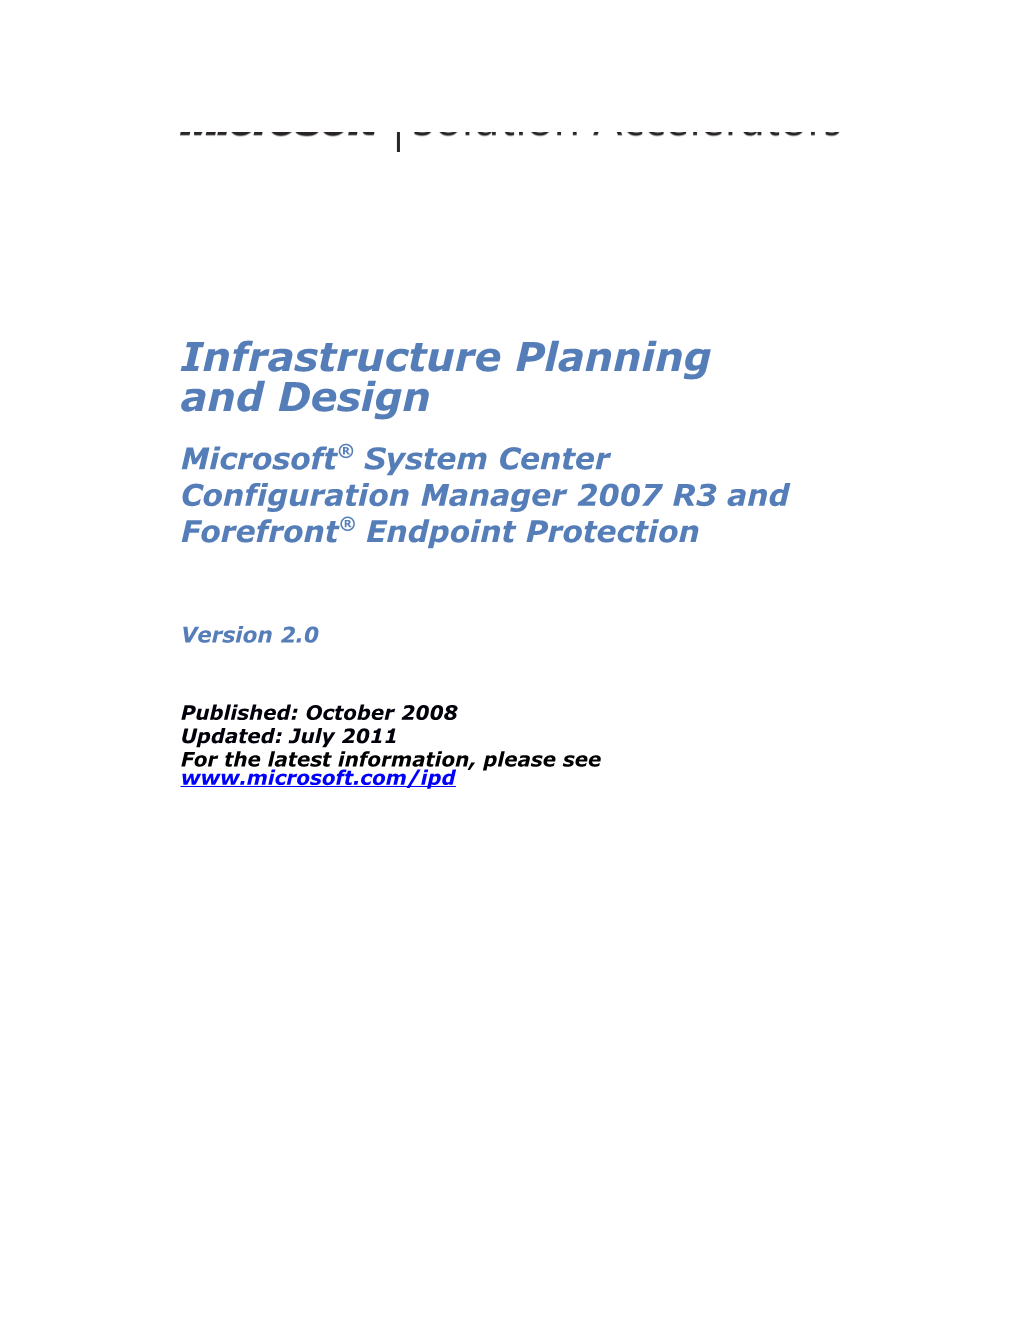 IPD - System Center Configuration Manager 2007 R3 And Forefront Endpoint Protection Version 2.0